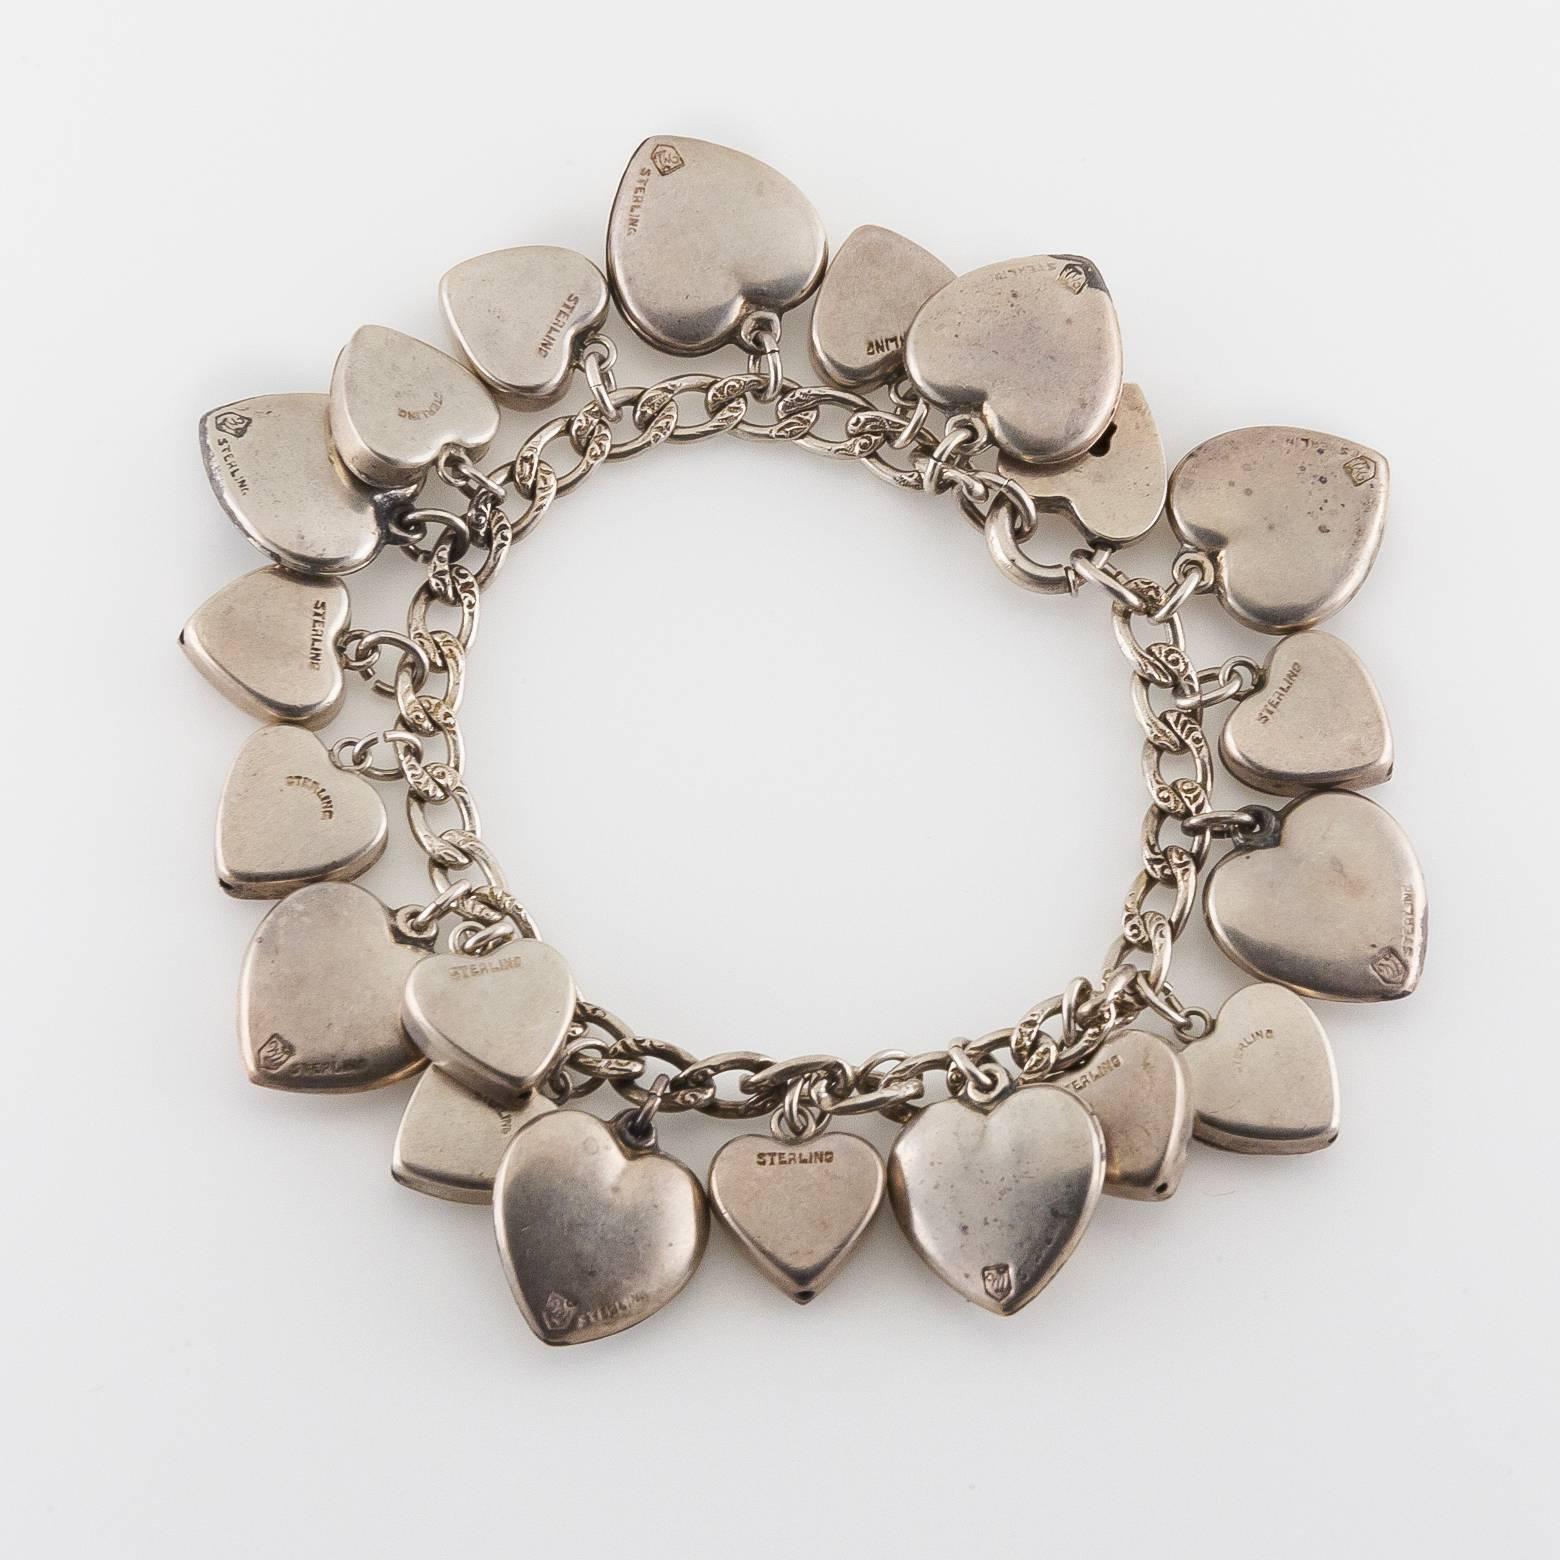 This beautiful antique charm bracelet is dazzled with clovers, flowers, bows, hearts and keyholes. Made out of sterling silver in America the pieces themselves were most likely made in the 1880's but assembled into a bracelet in the 1920's. It's